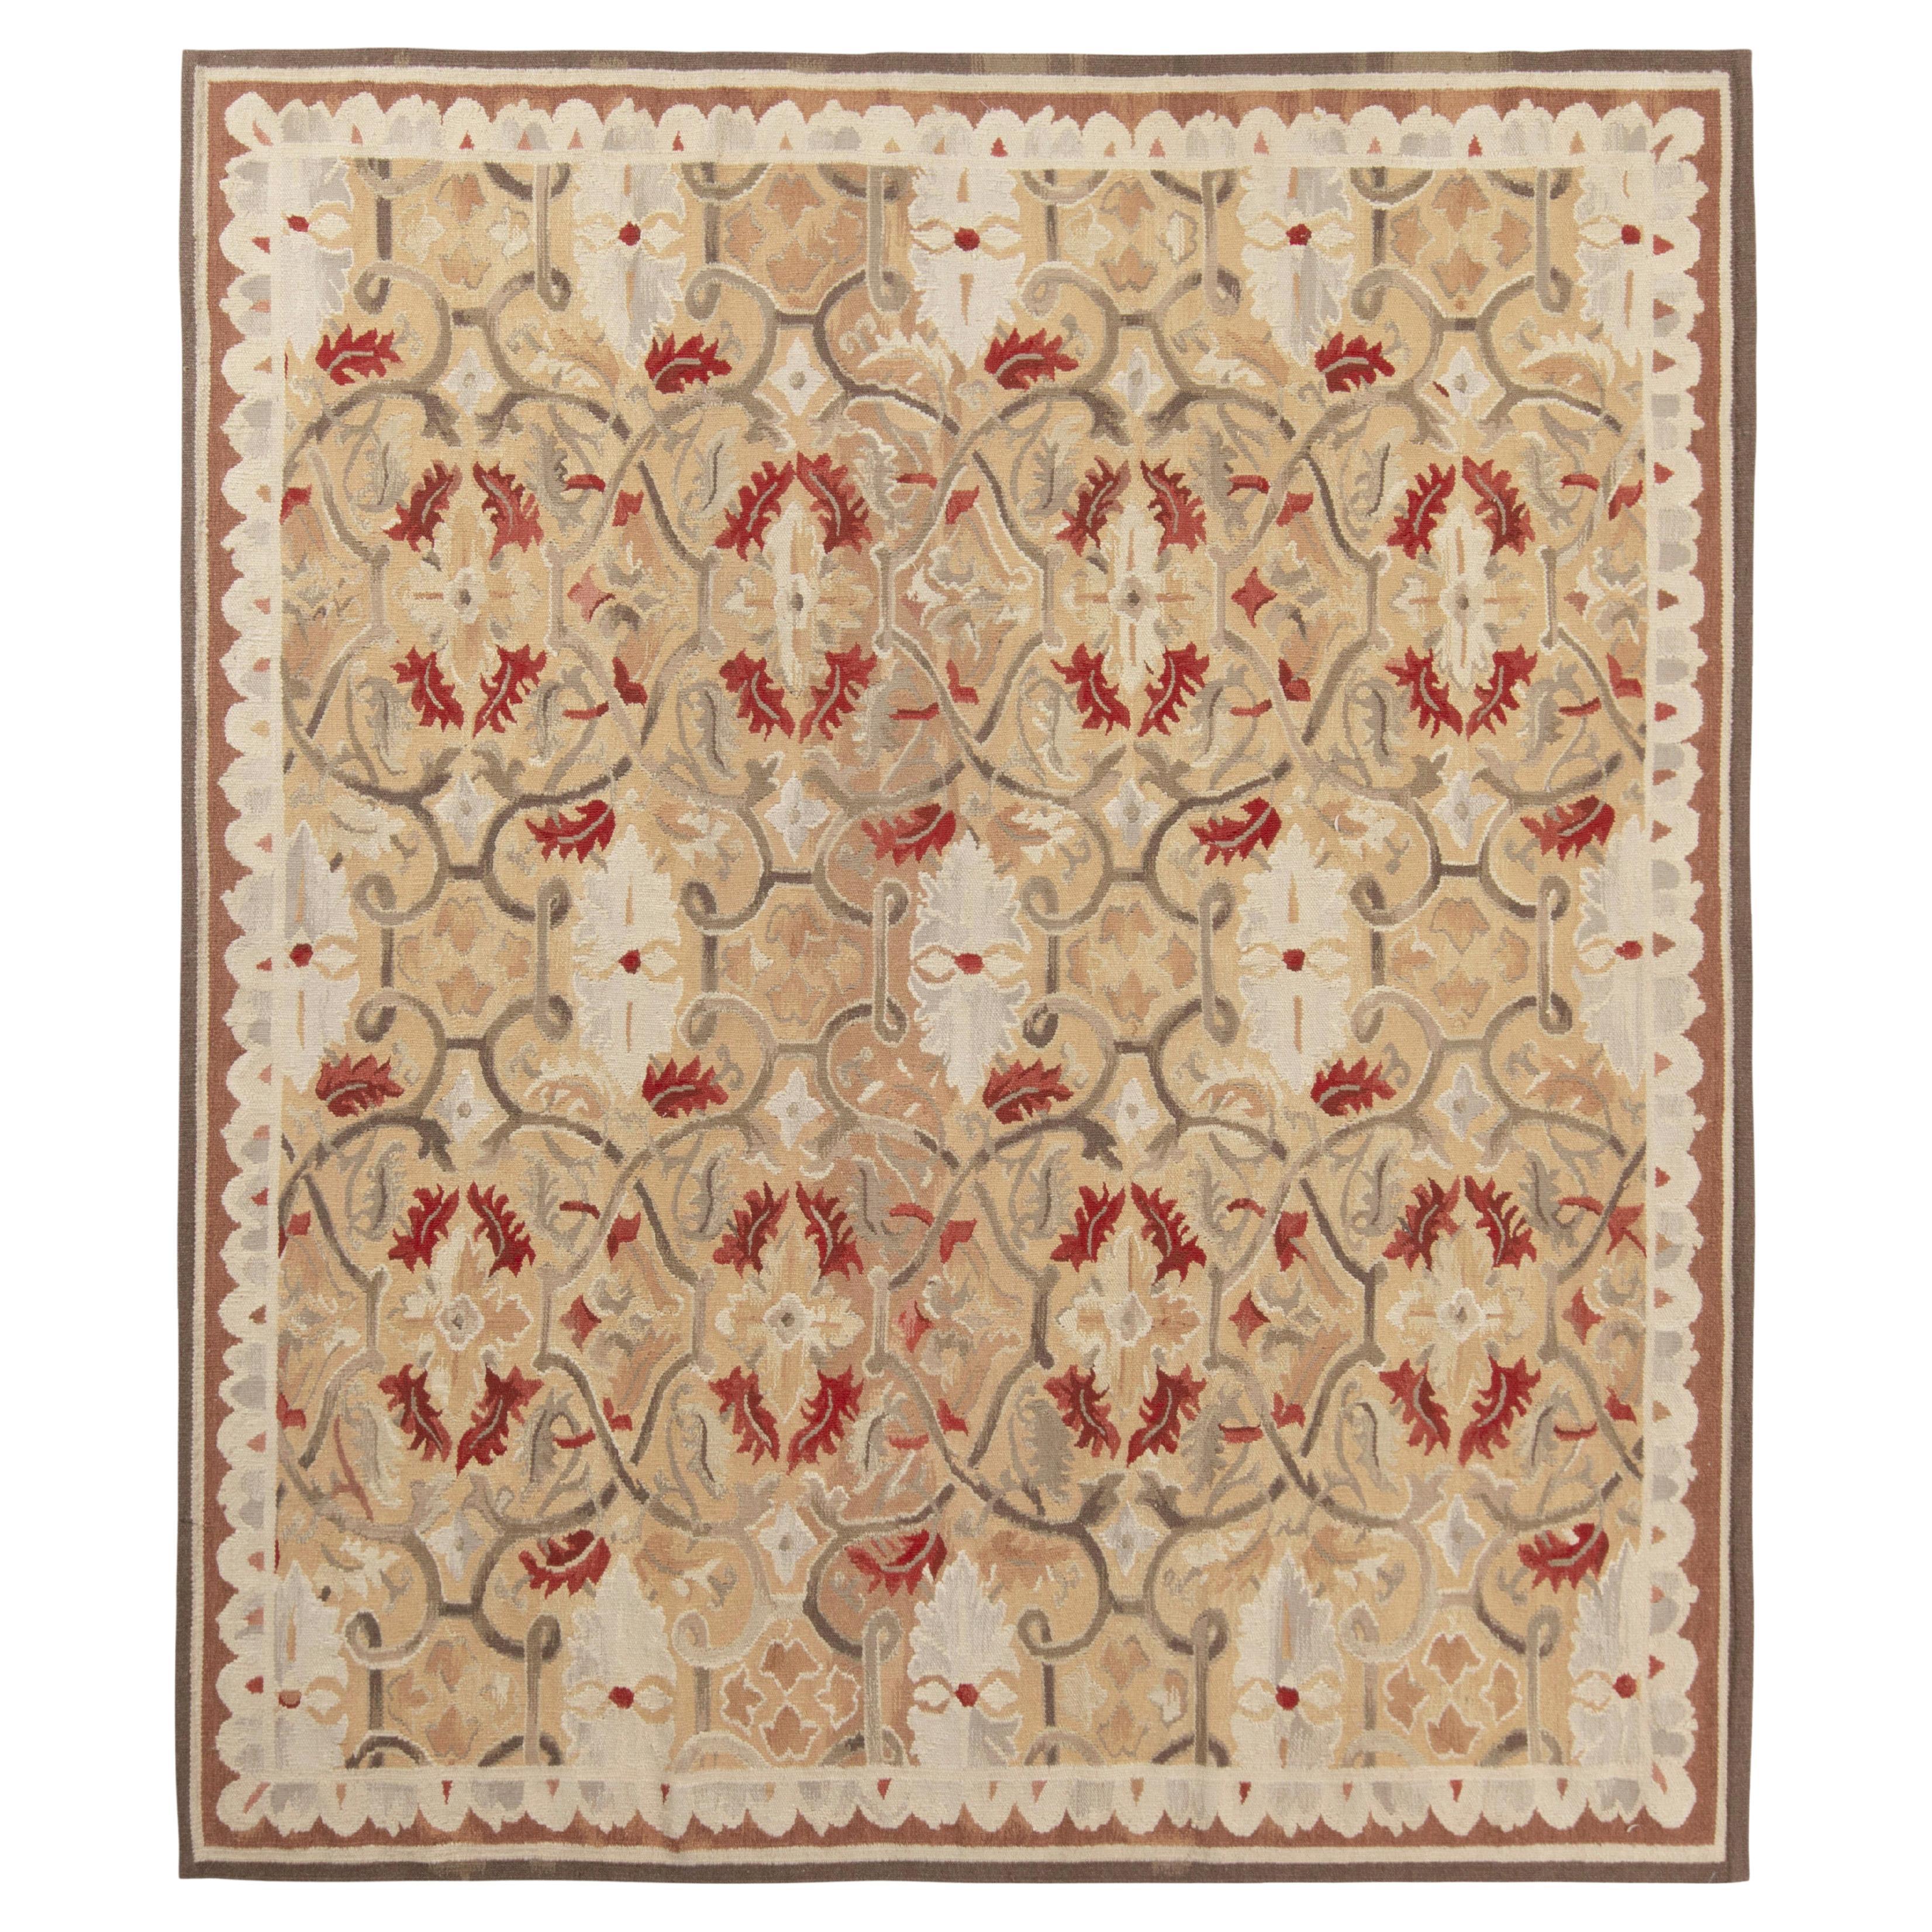 Rug & Kilim’s Aubusson Flat Weave Style Rug, Beige, Gray and Red Floral Pattern For Sale